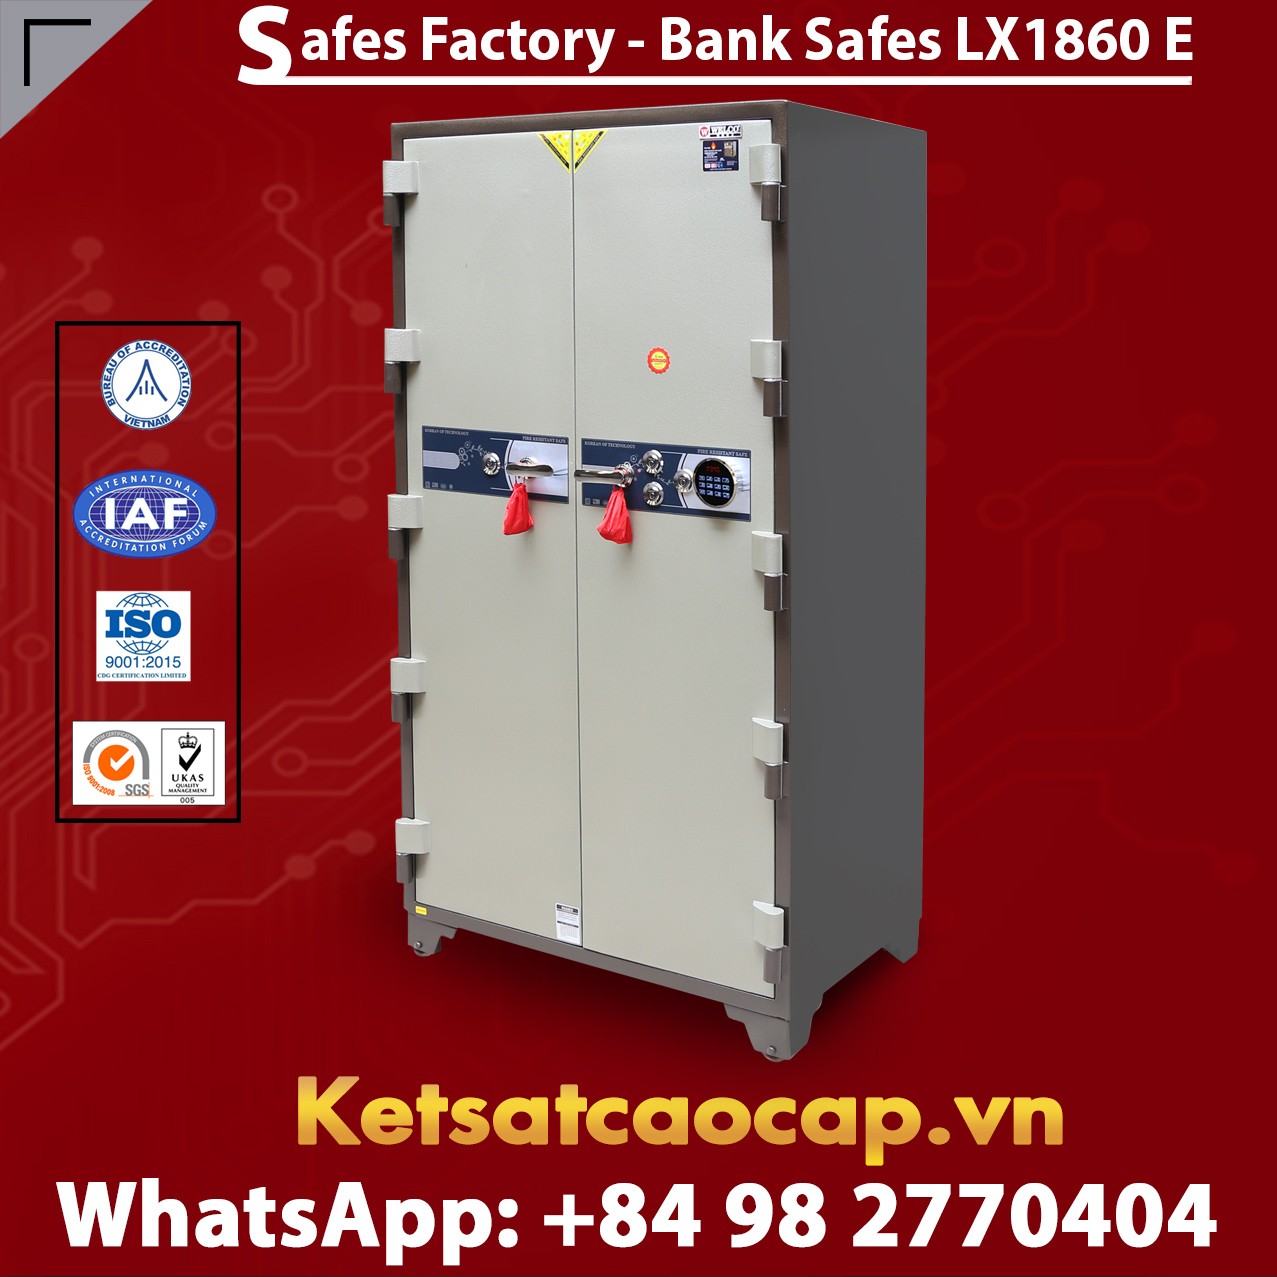 Bank Safes Deposit Box Suppliers and Exporters